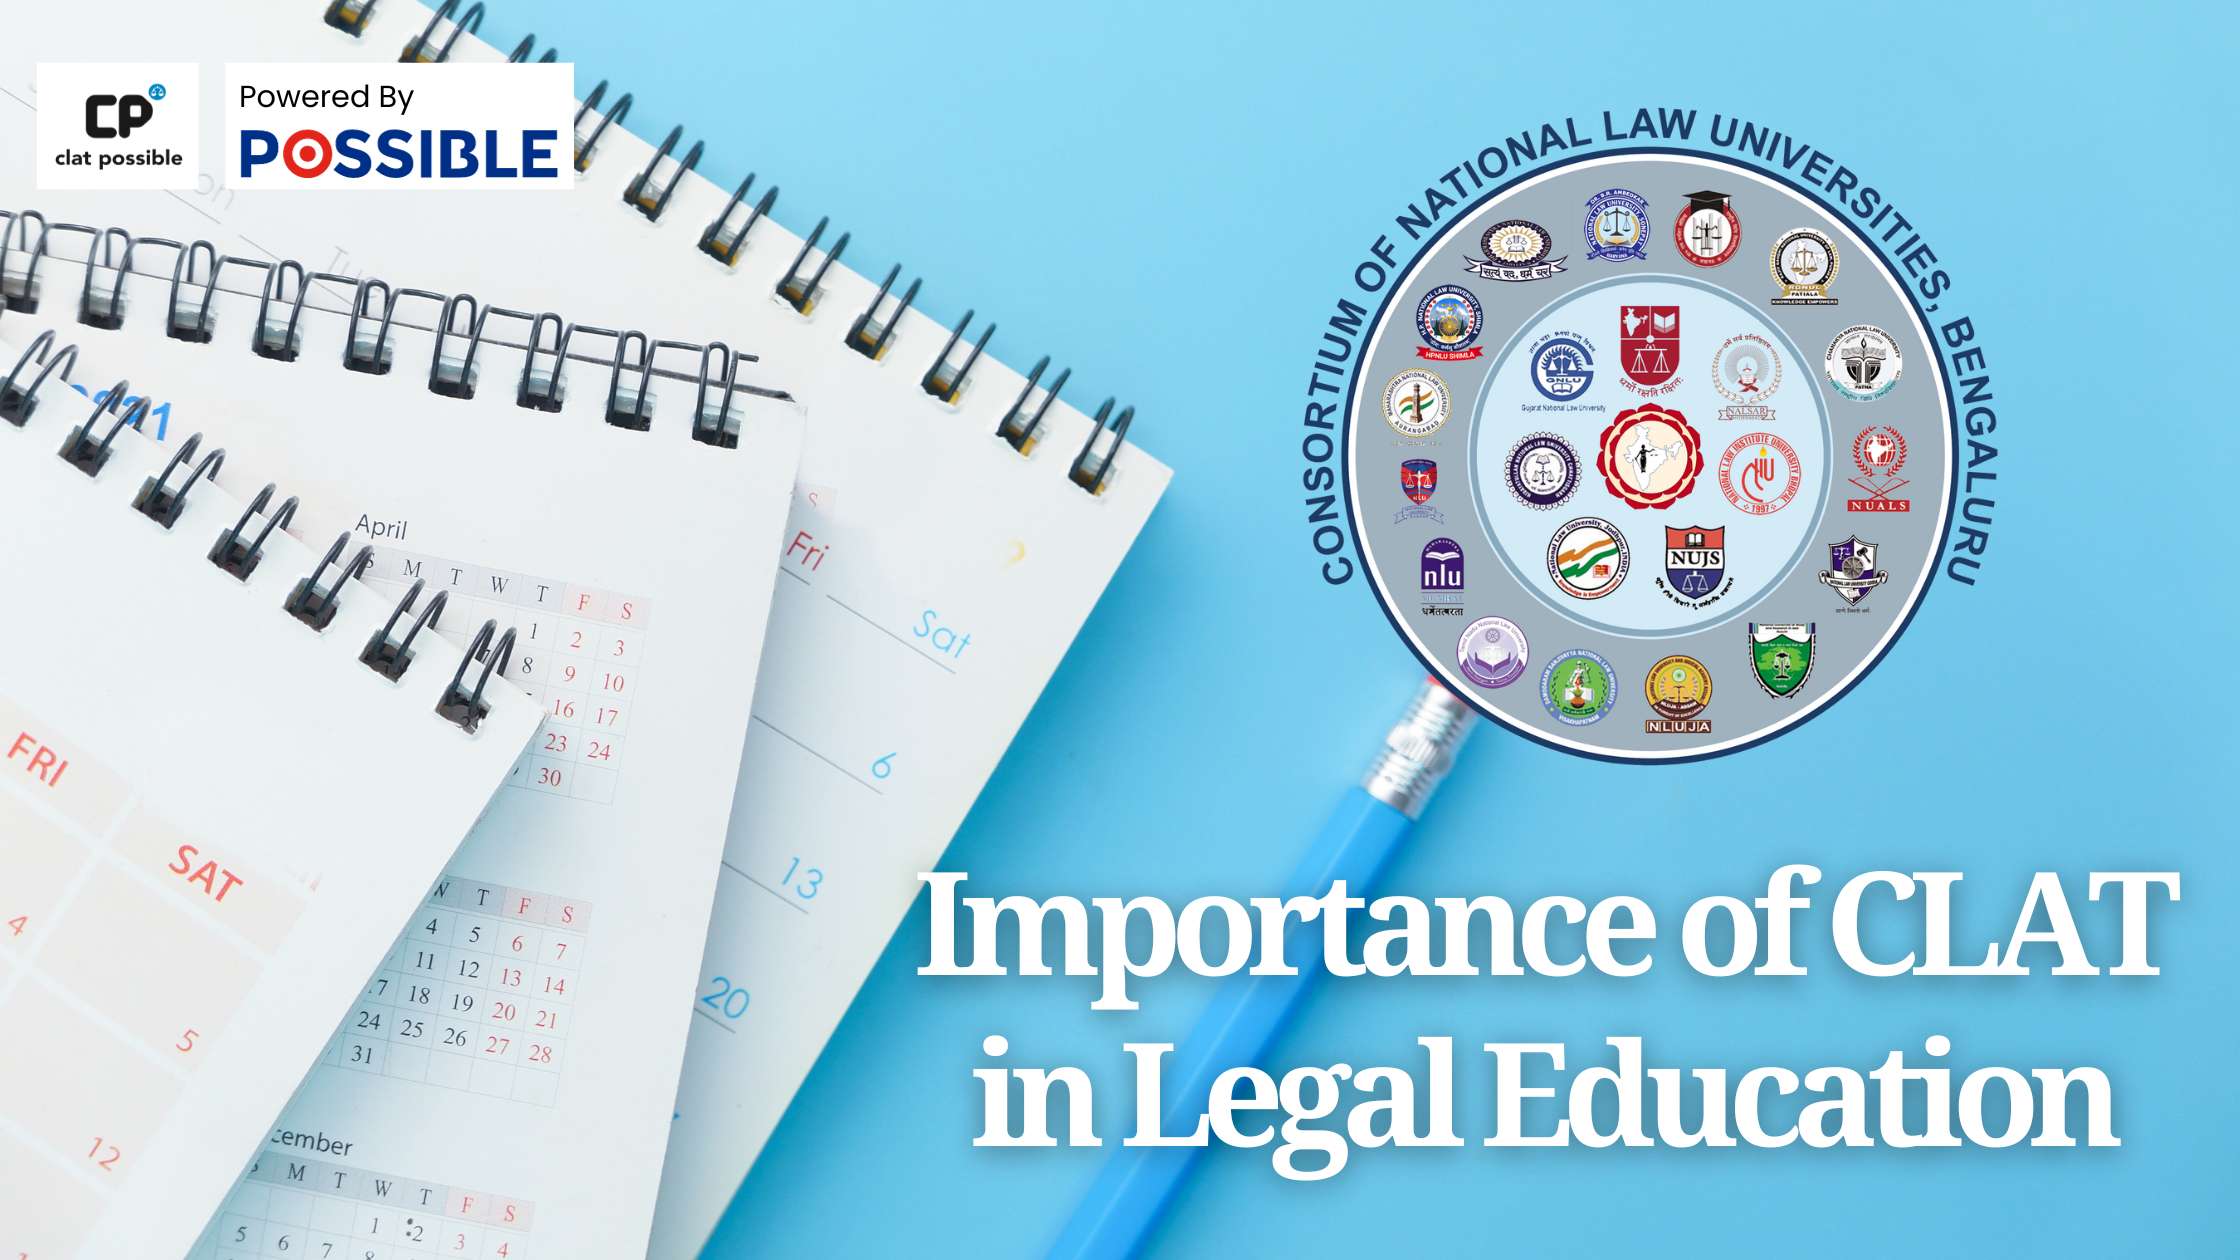 The Importance of CLAT in Legal Education